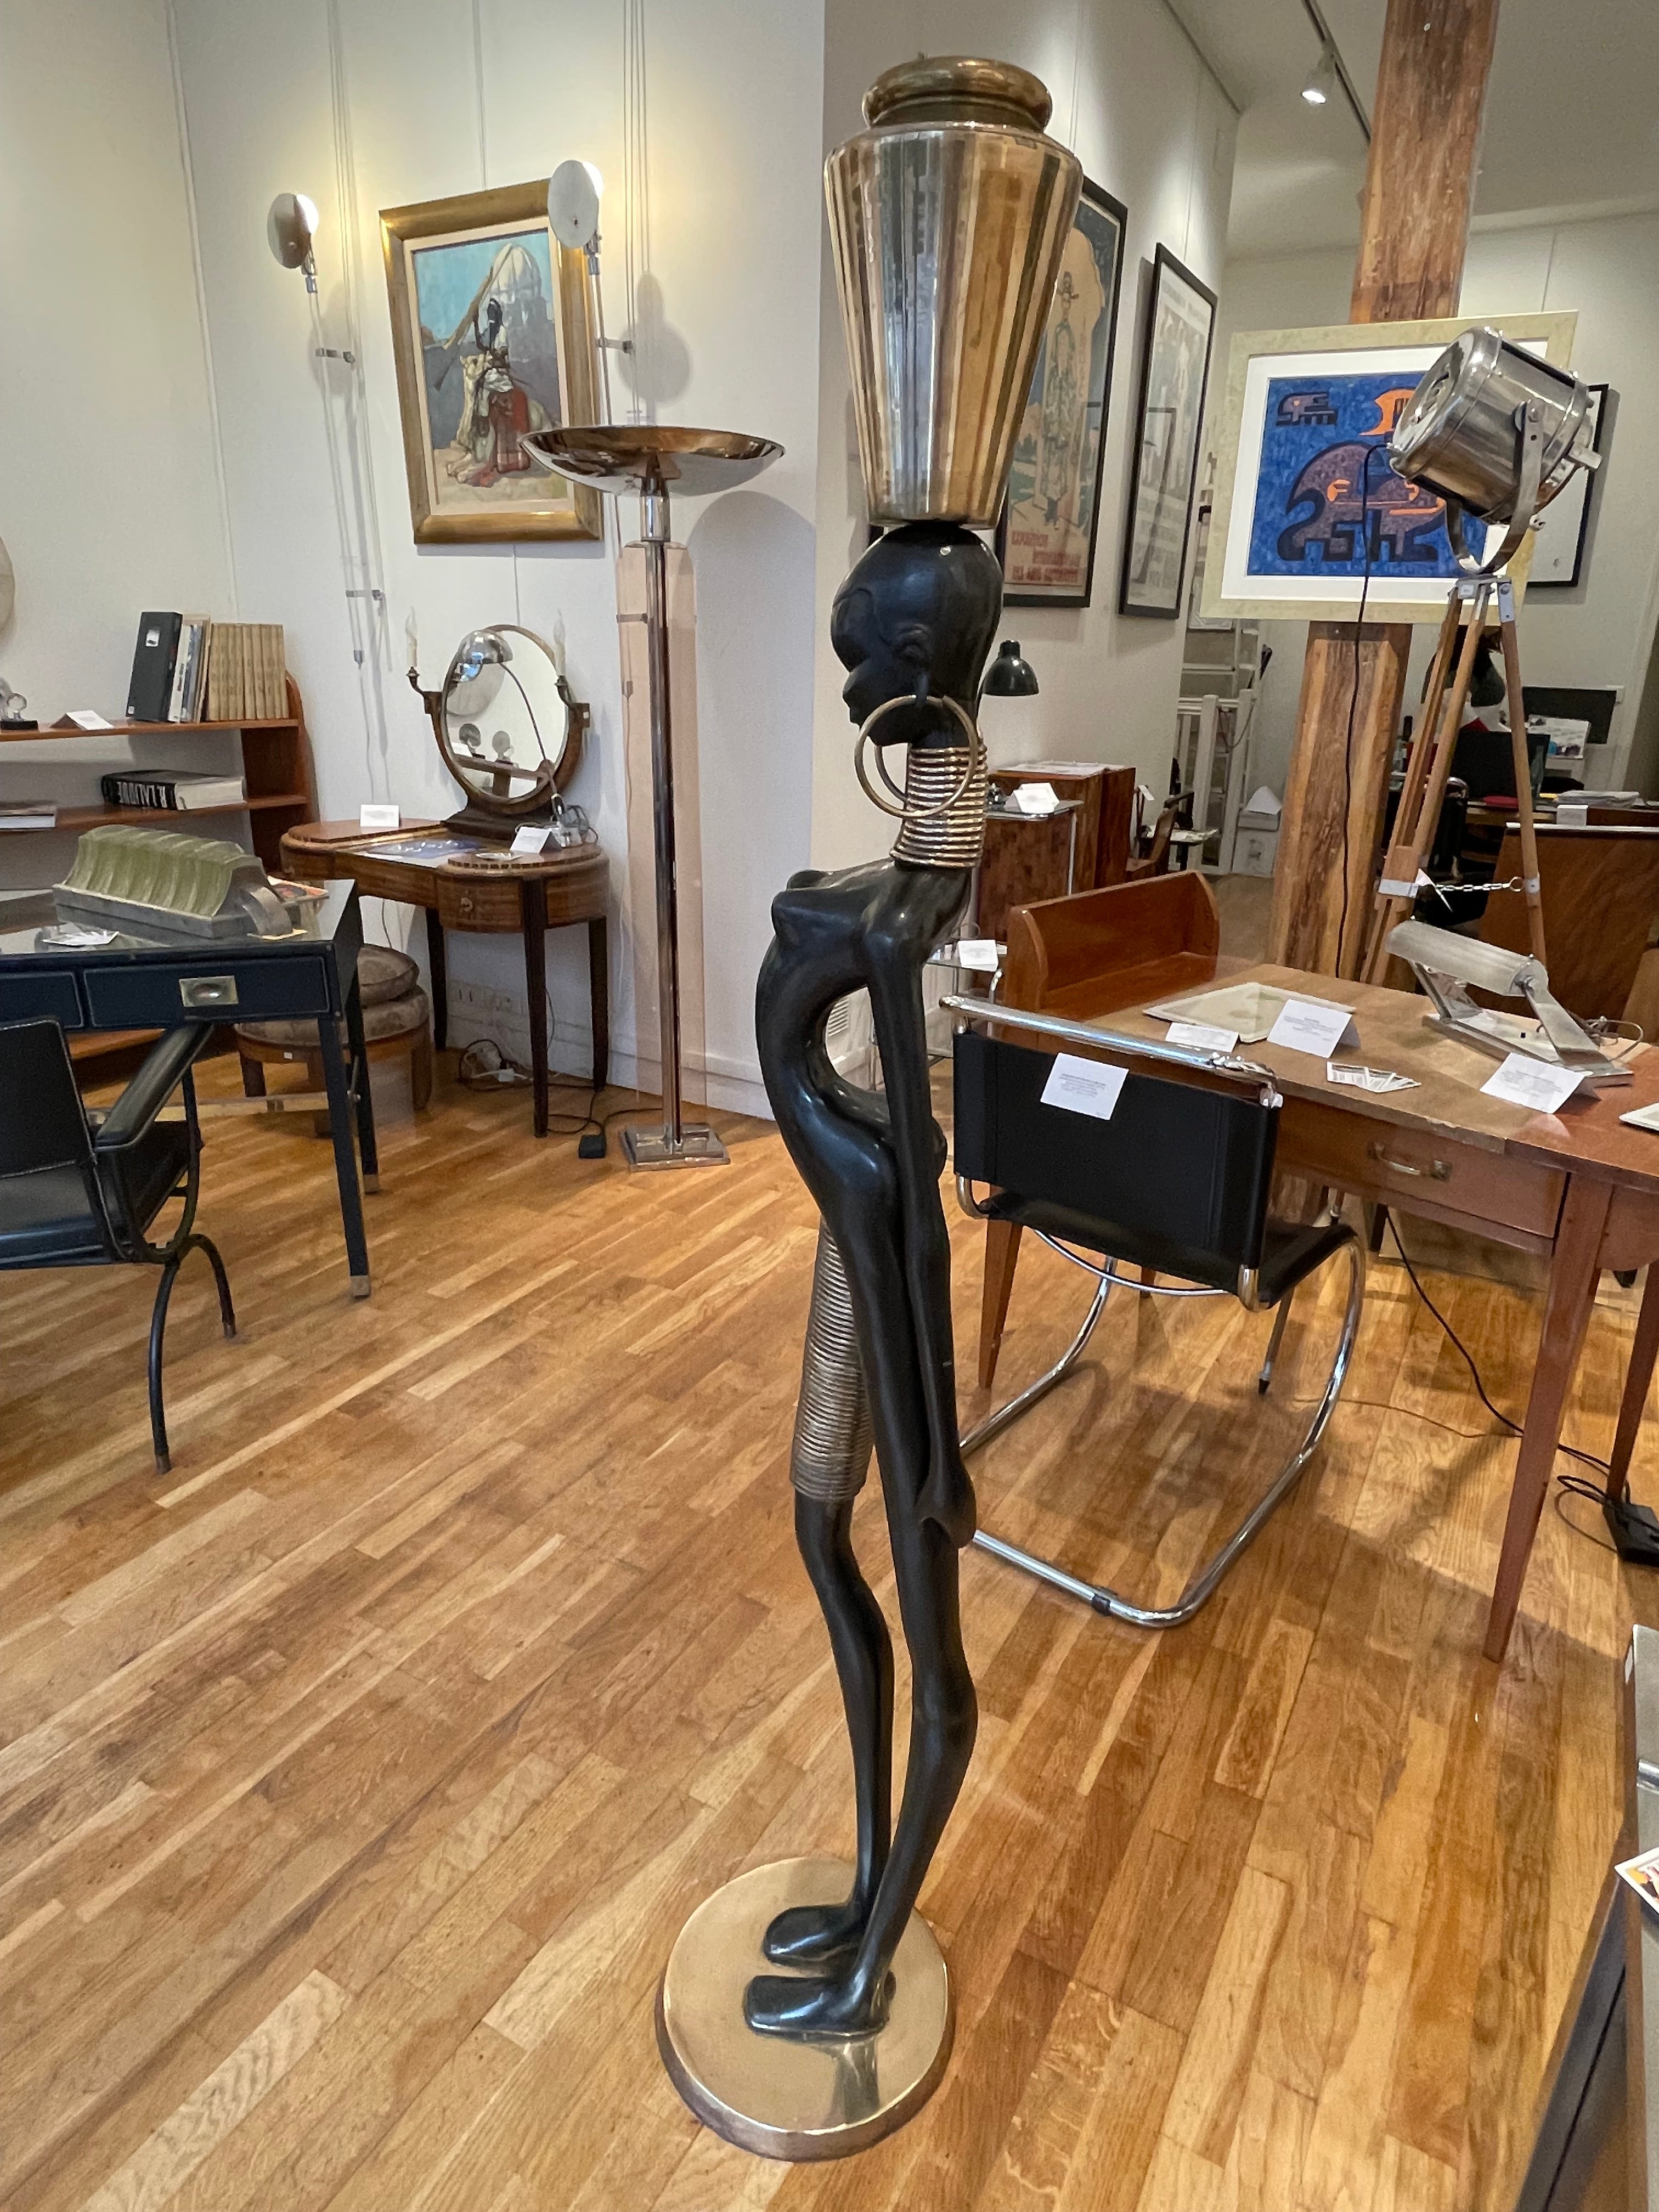 Stunning life size bronze of an African lady carrying water. Bronze and brass. It is in the typical style of Karl Hagenauer; famous Austrian designer active between the 1920's and the 1950's.
Size: height 166cm, diameter of the base 30cm.